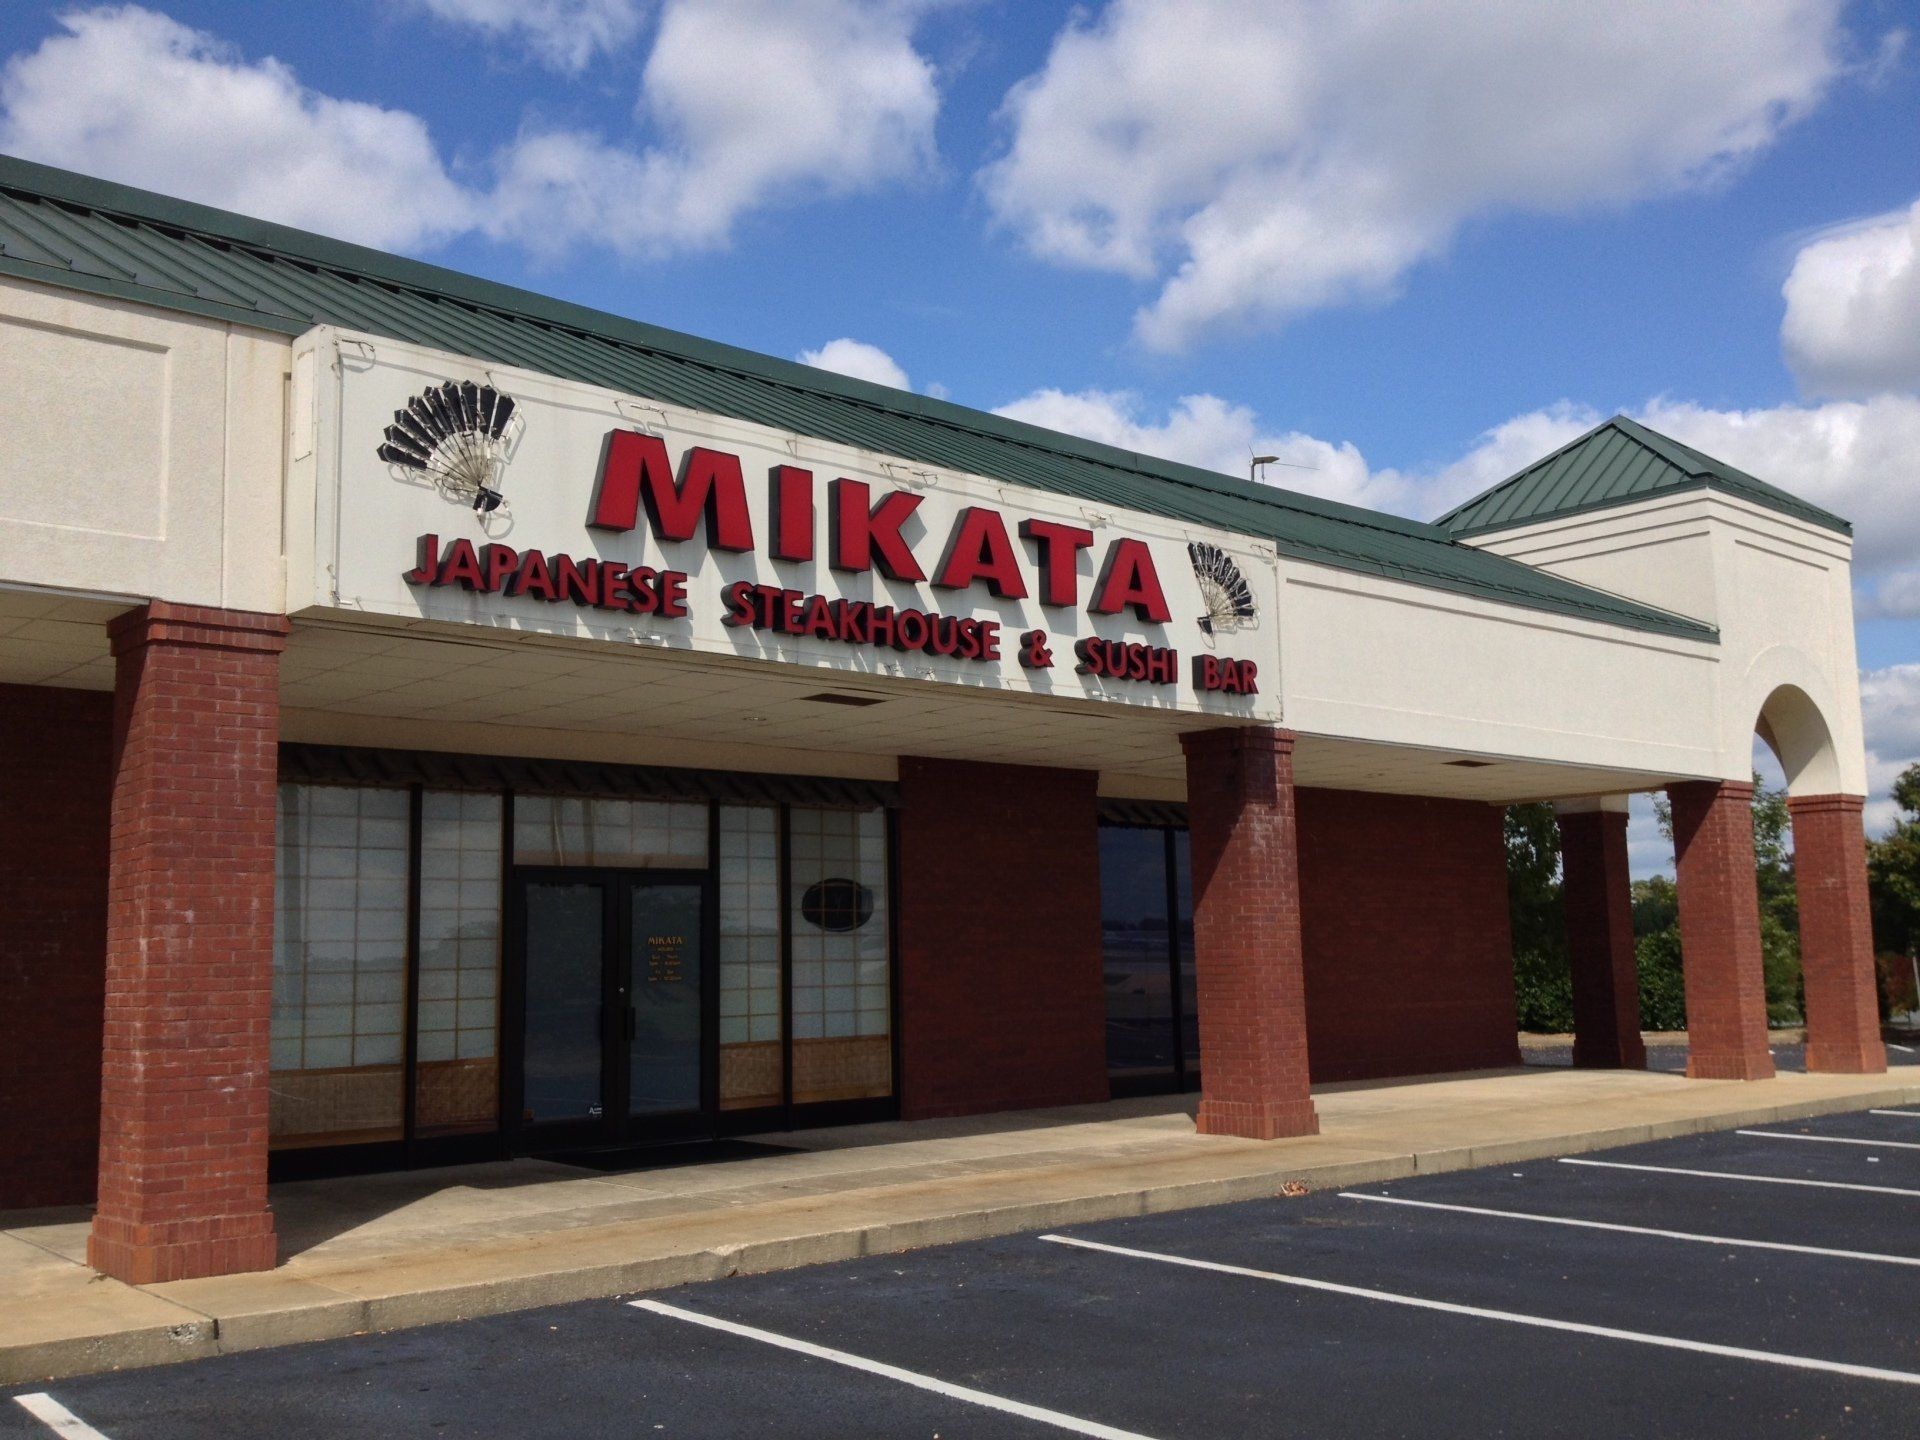 A building with a sign that says ' mikata ' on it